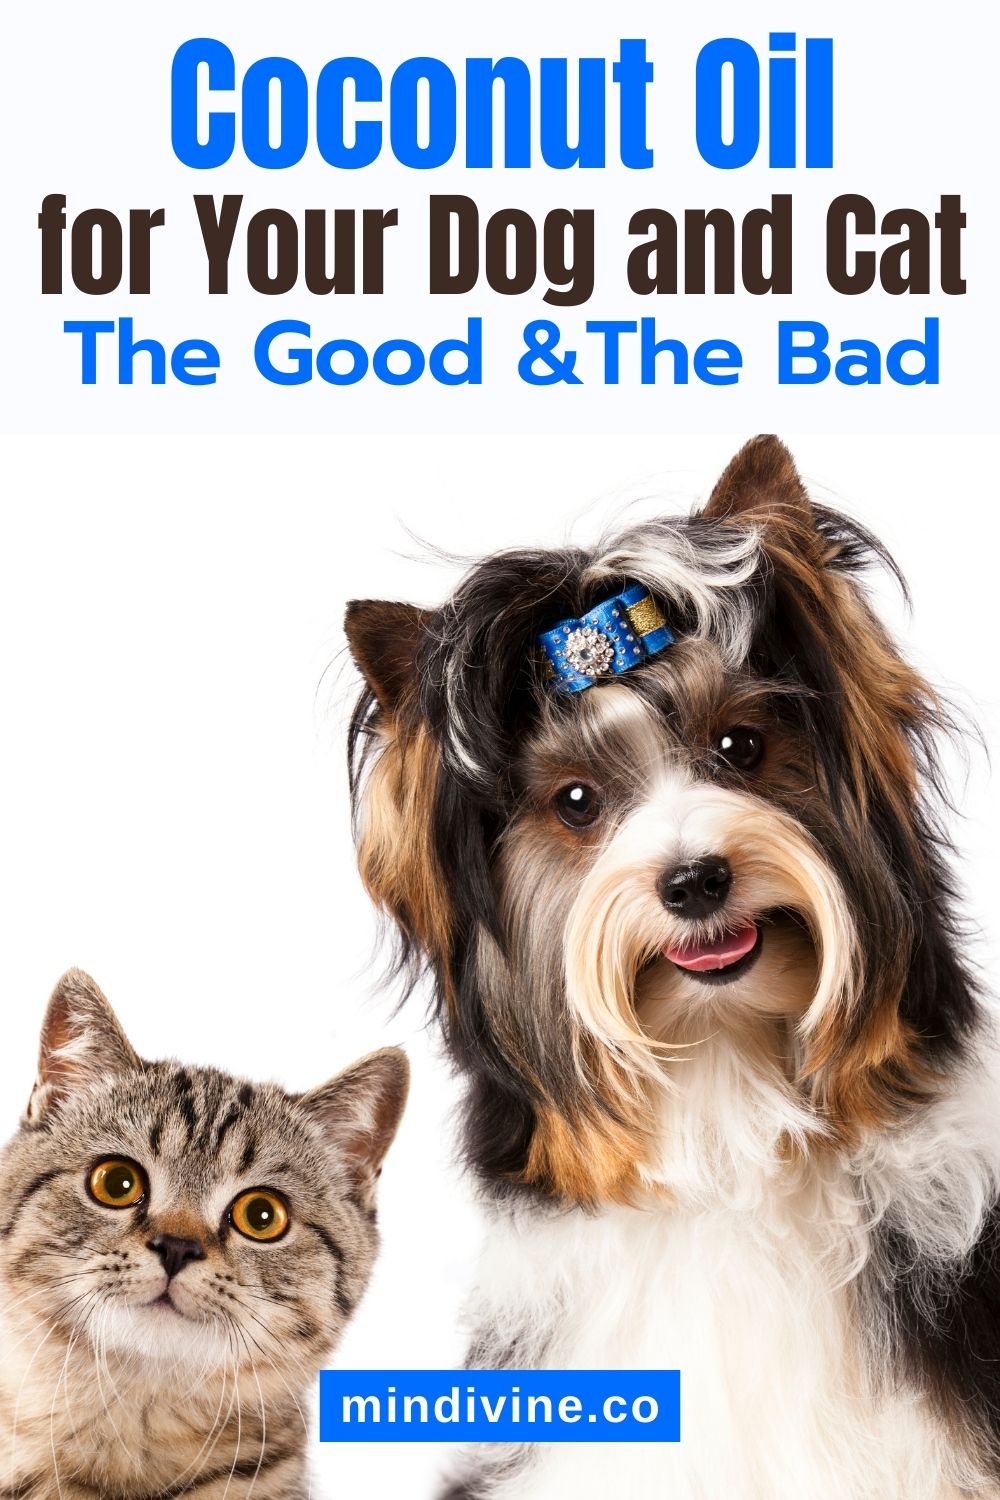 Funny long haired dog with blue brooch on the head with cat on white background.